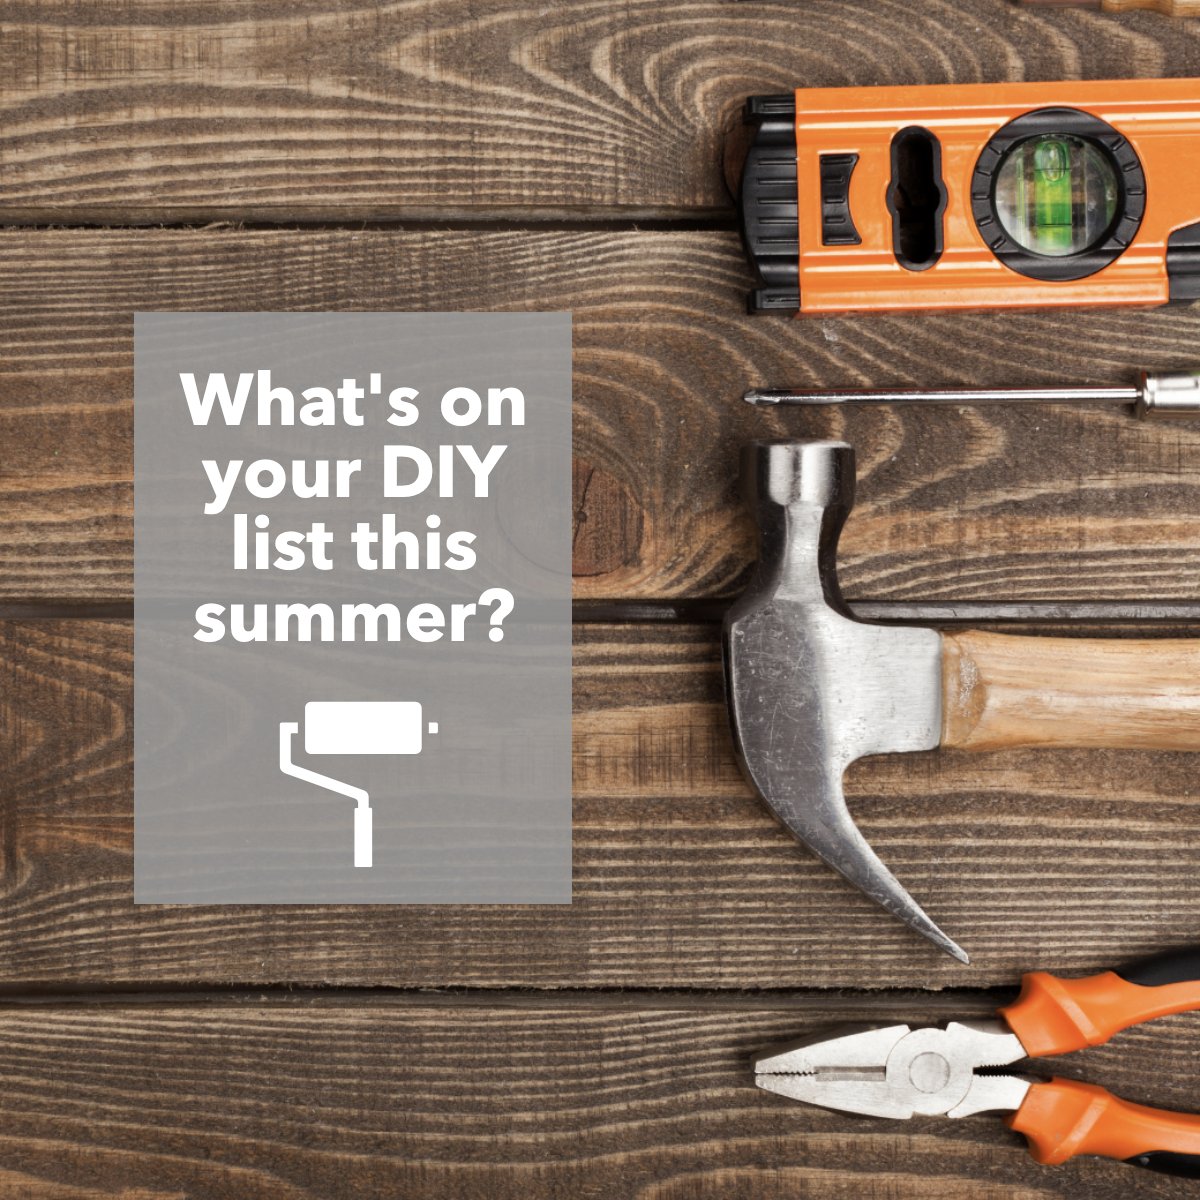 Tell us all about your summer projects ☀️! 

#question    #DIY    #DIYproject    #fixerupper    #tools

#soldcity #exprealty #homesinwaterloo #homesinkitchener #homesincambridge